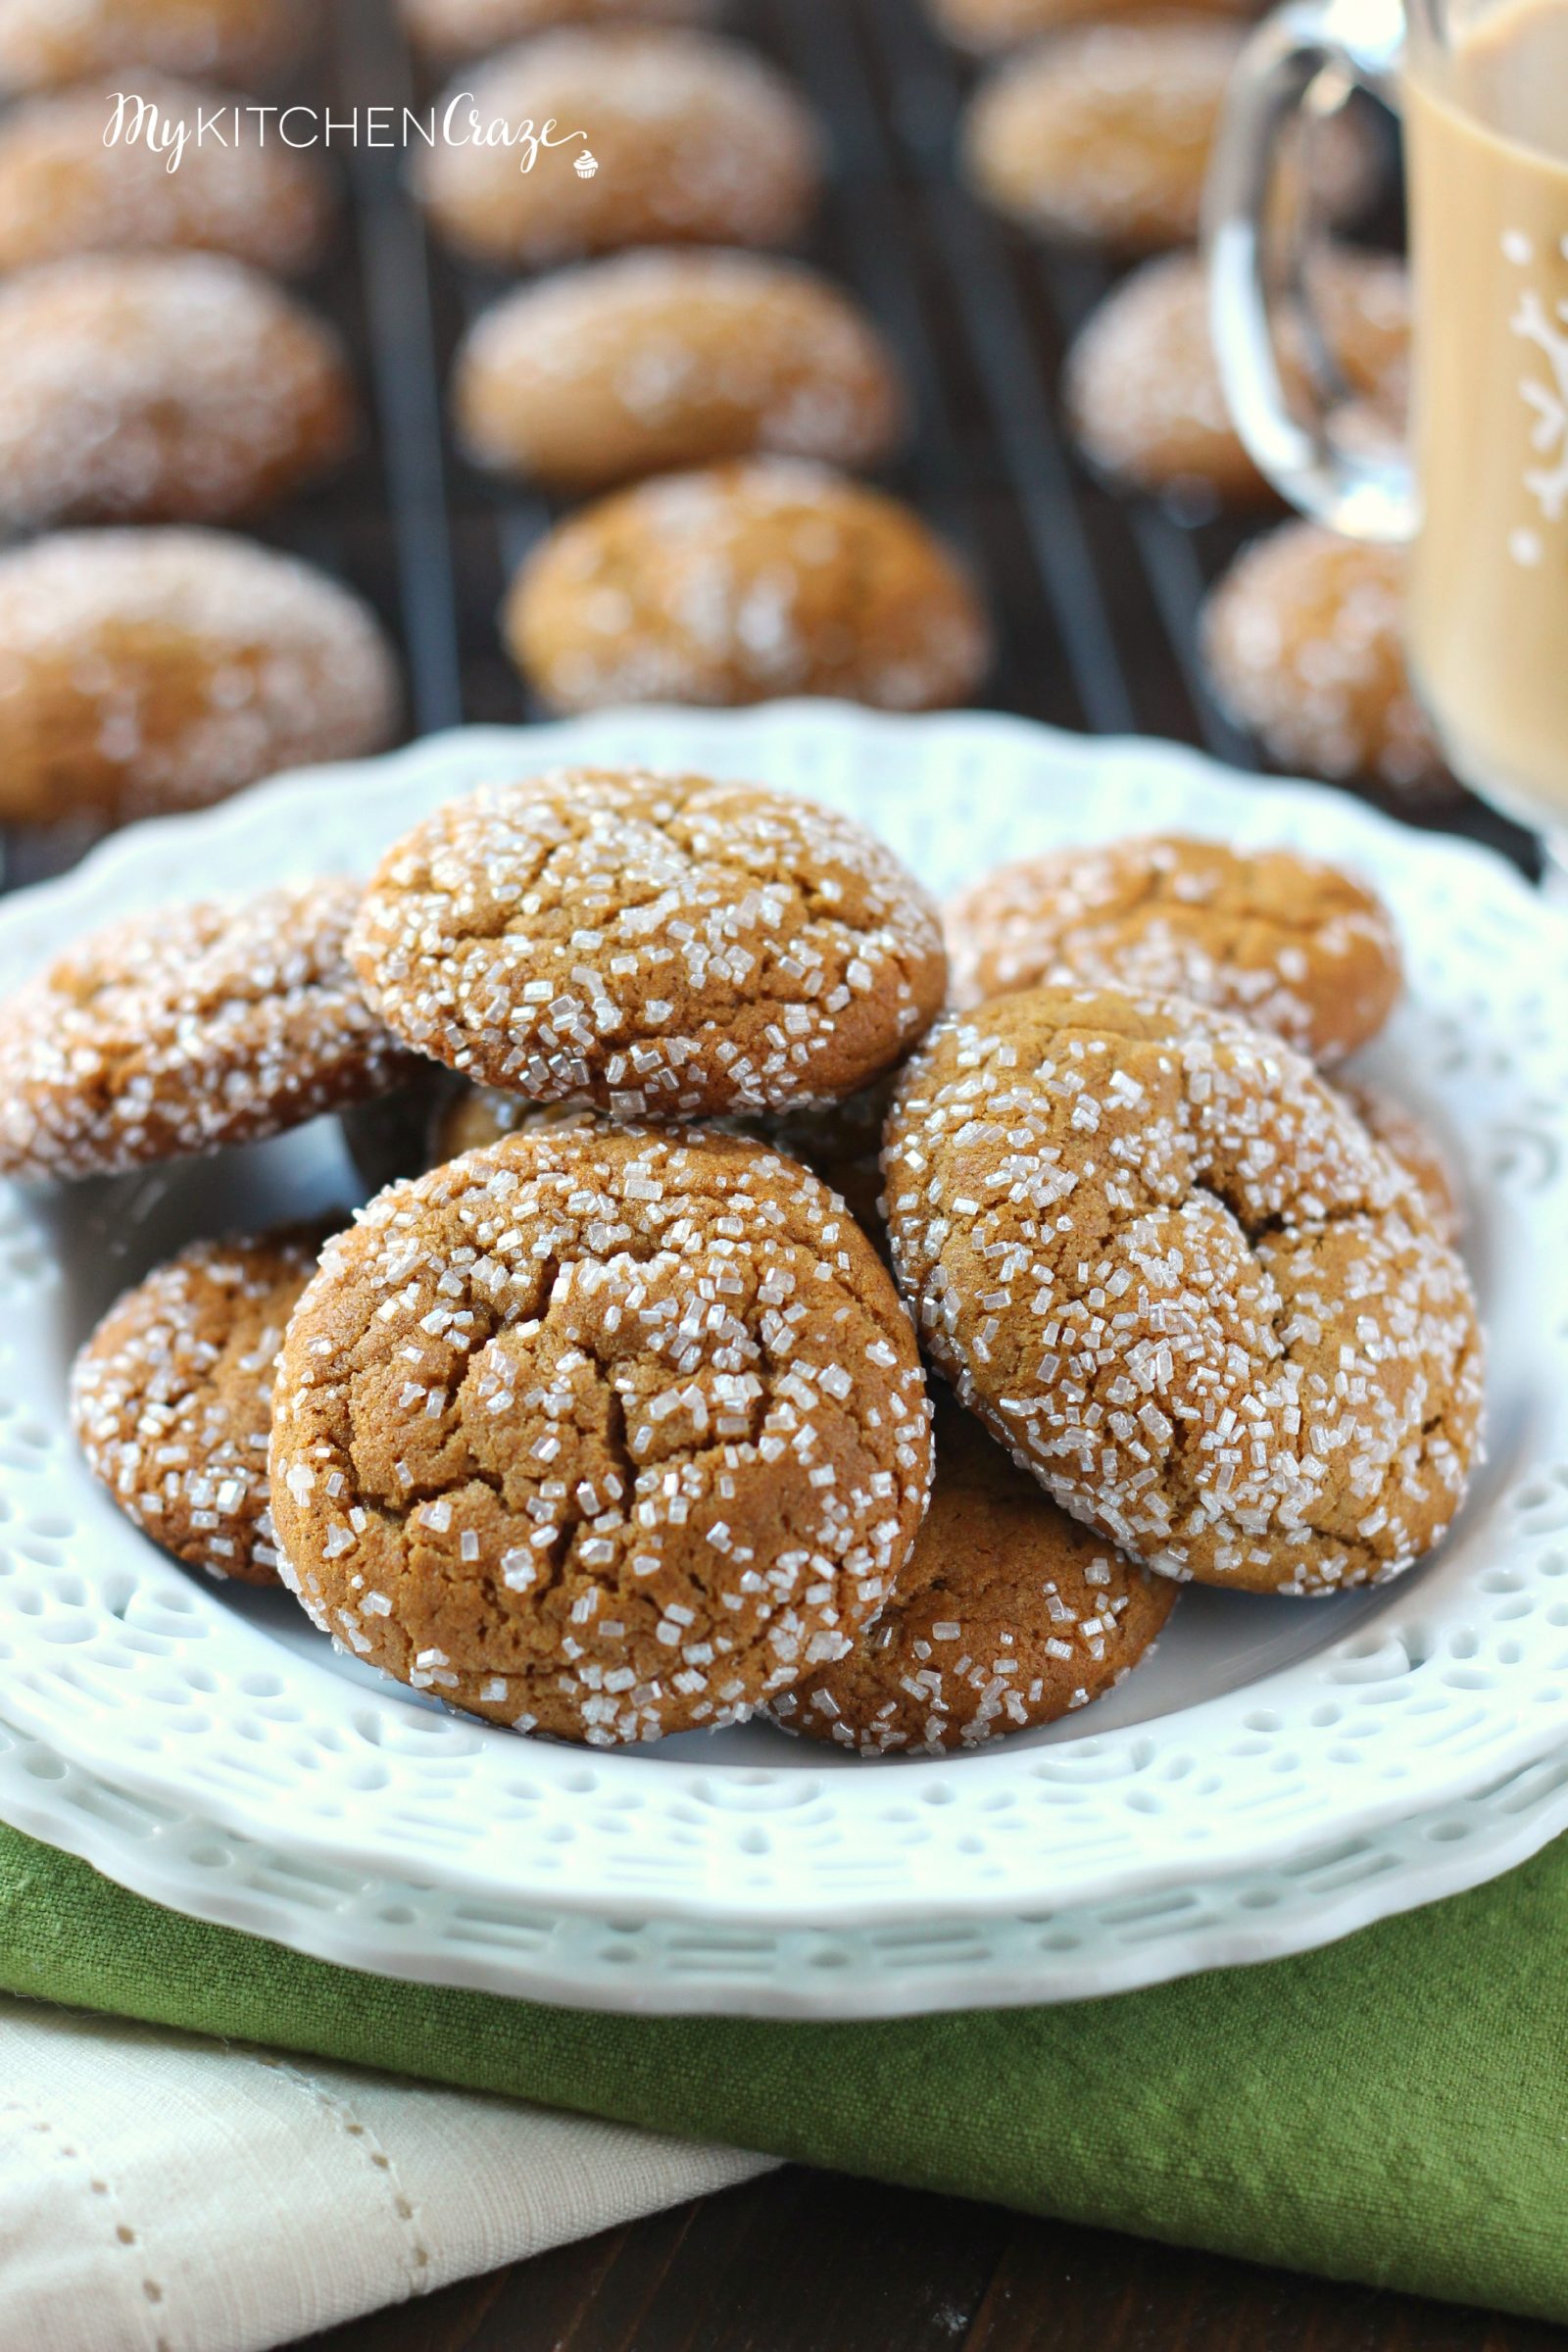 Molasses Crinkle Cookies ~ mykitchencraze.com ~ A delicious, soft chewy molasses crinkle cookie. Loaded with cinnamon, ginger and cloves. These cookies will be a hit!